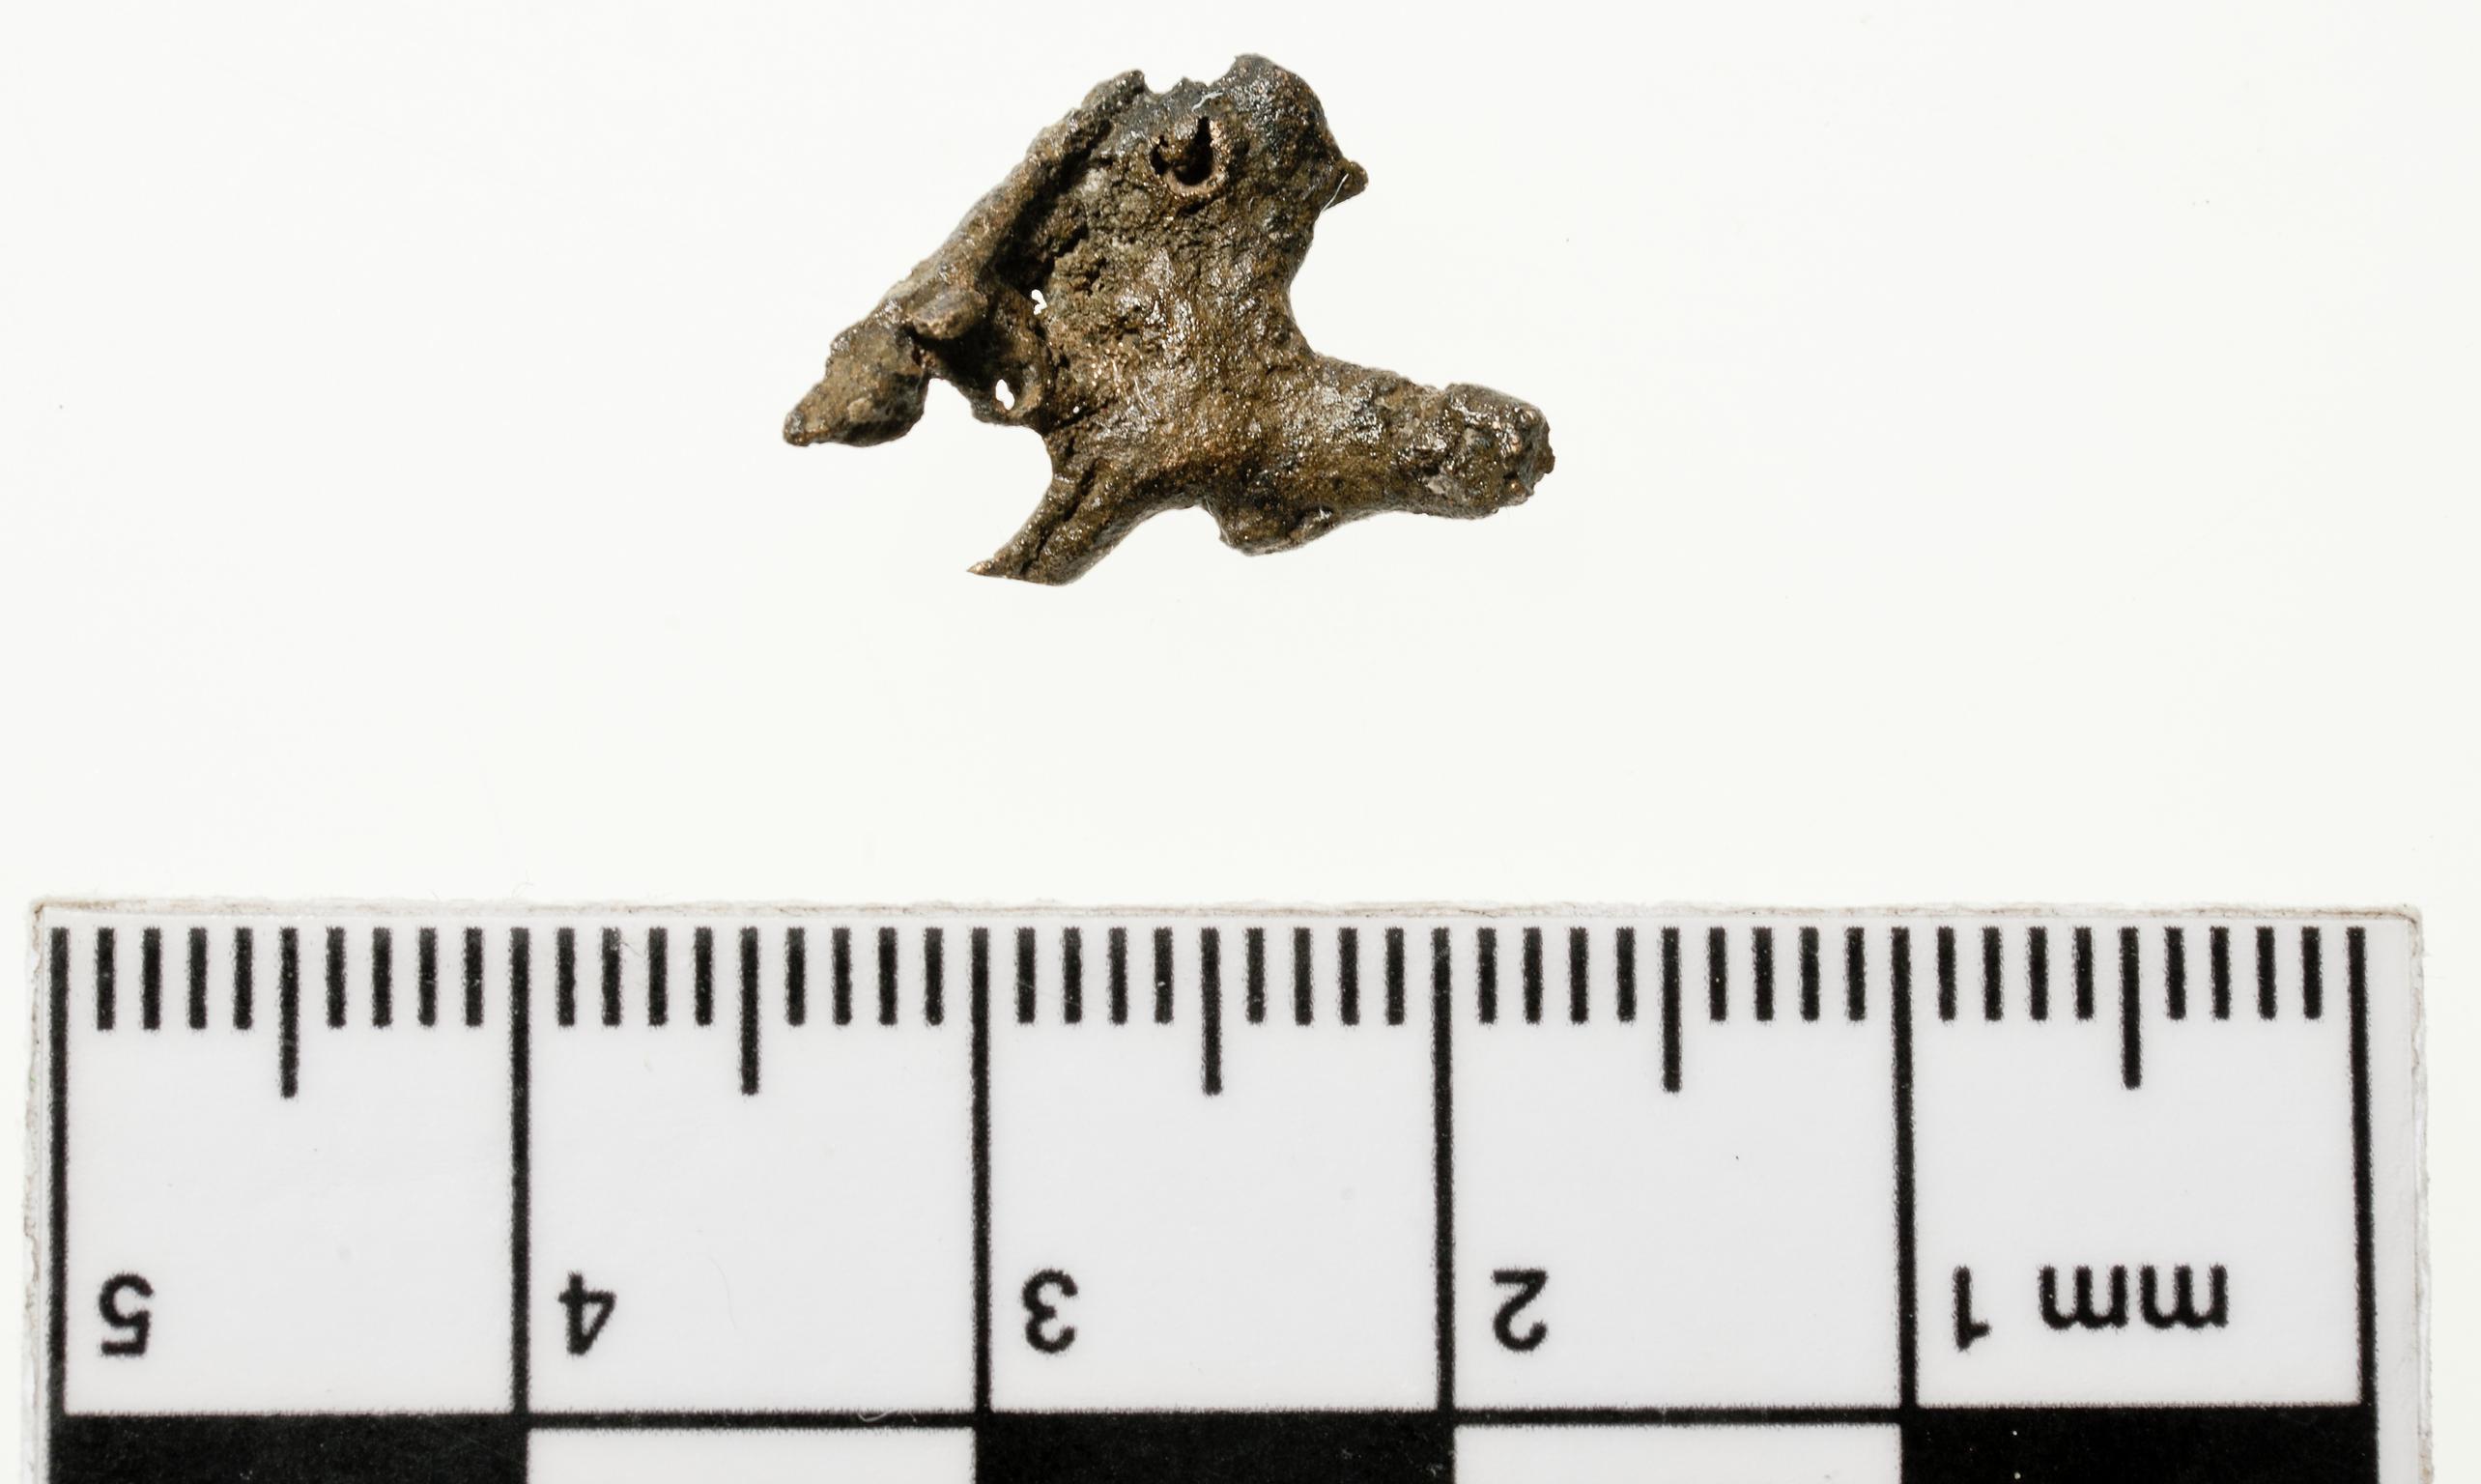 Early Medieval copper alloy waste